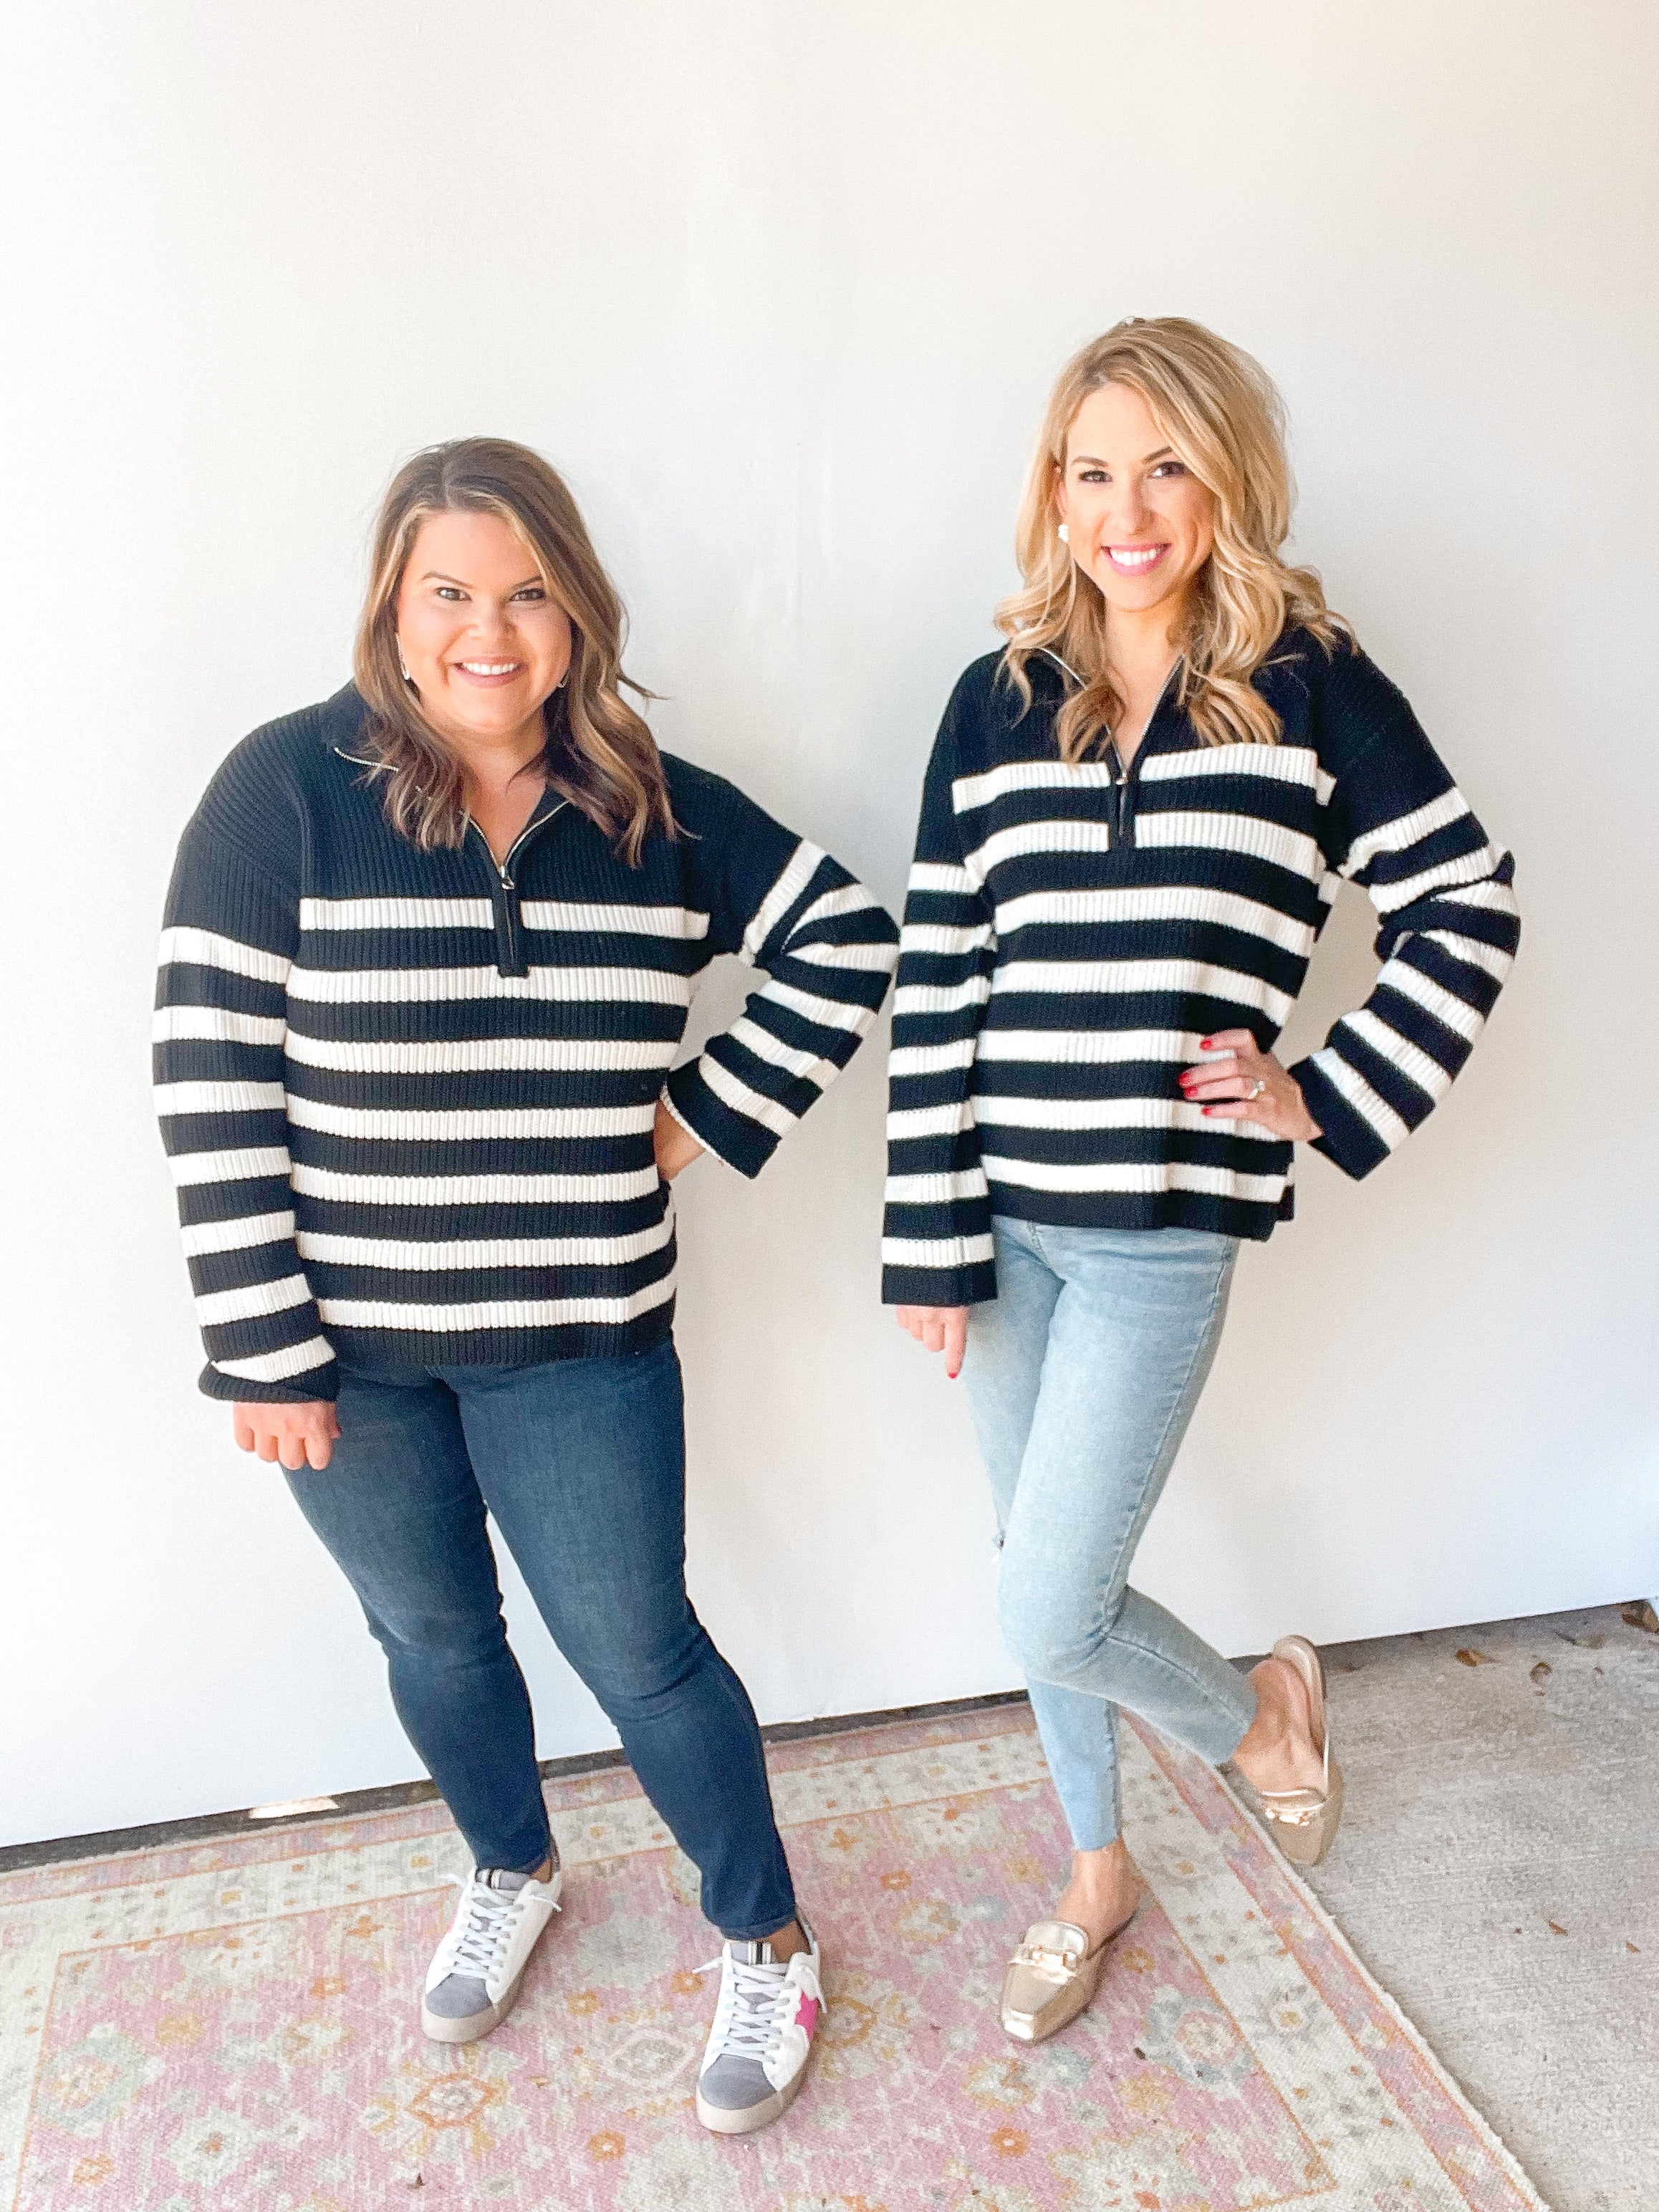 Rosa Black and White Pullover